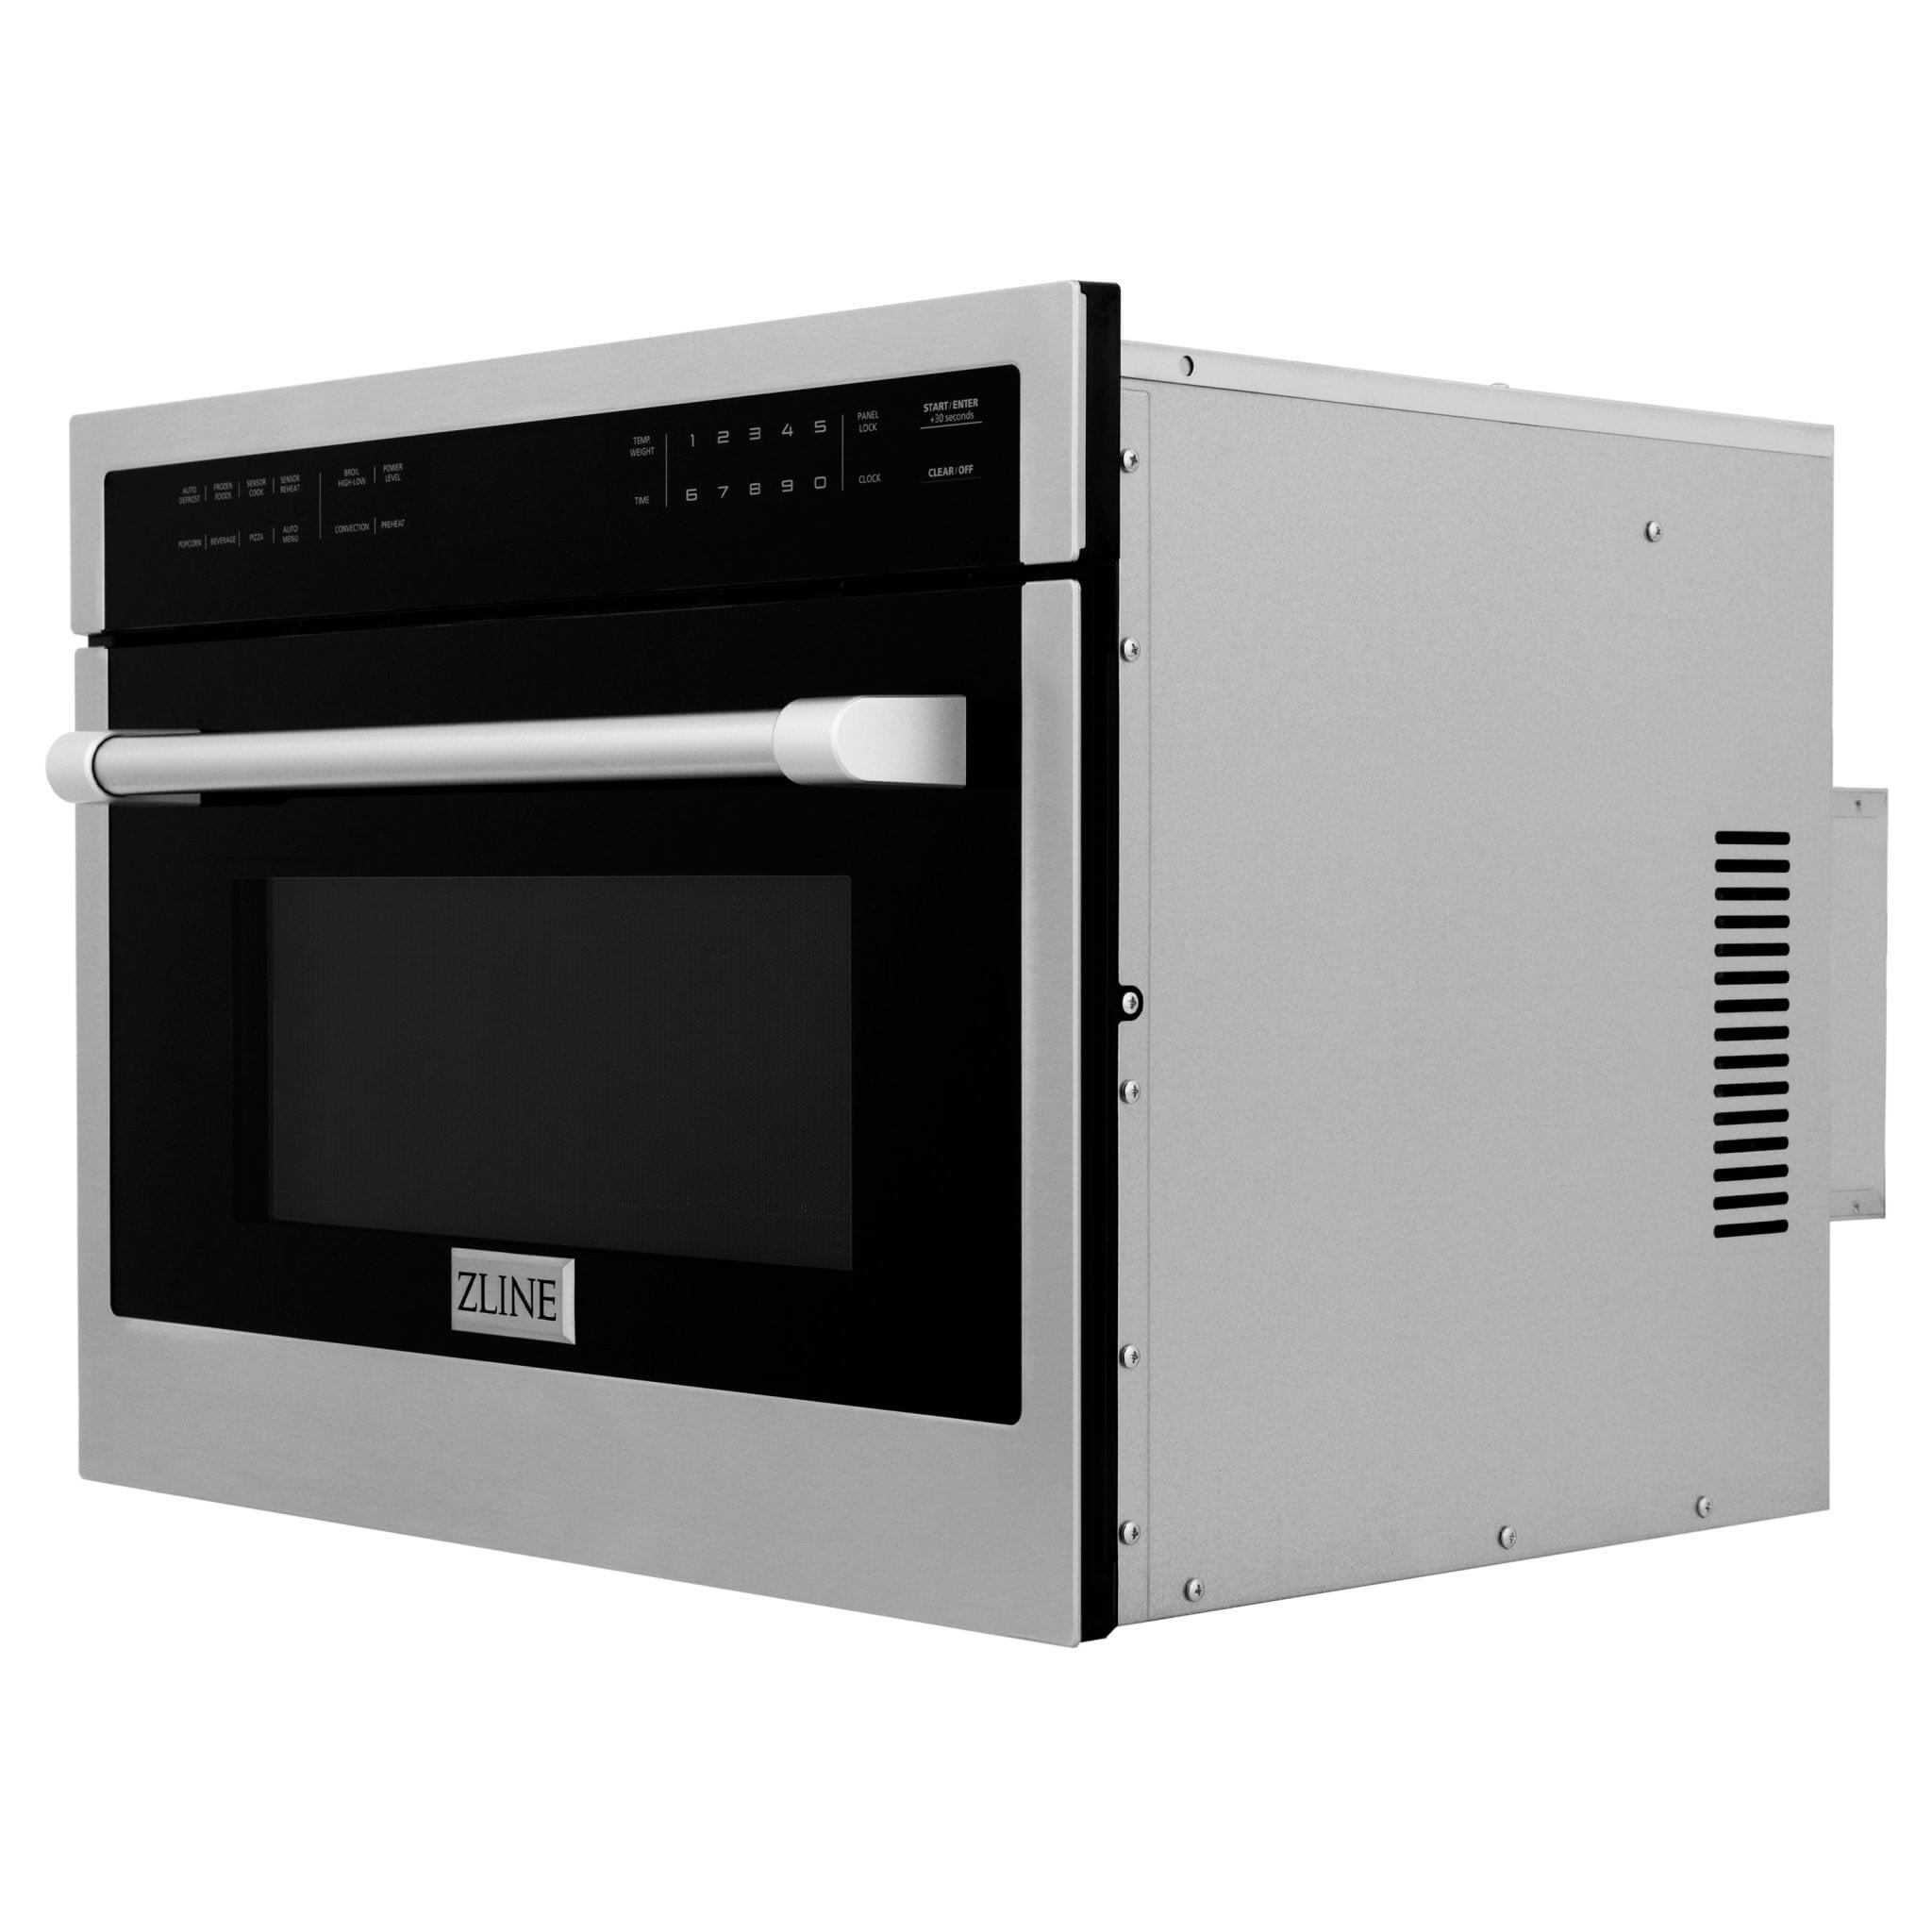 ZLINE 24 in. Stainless Steel Built-in Convection Microwave Oven with Speed and Sensor Cooking (MWO-24) Side View Door Closed